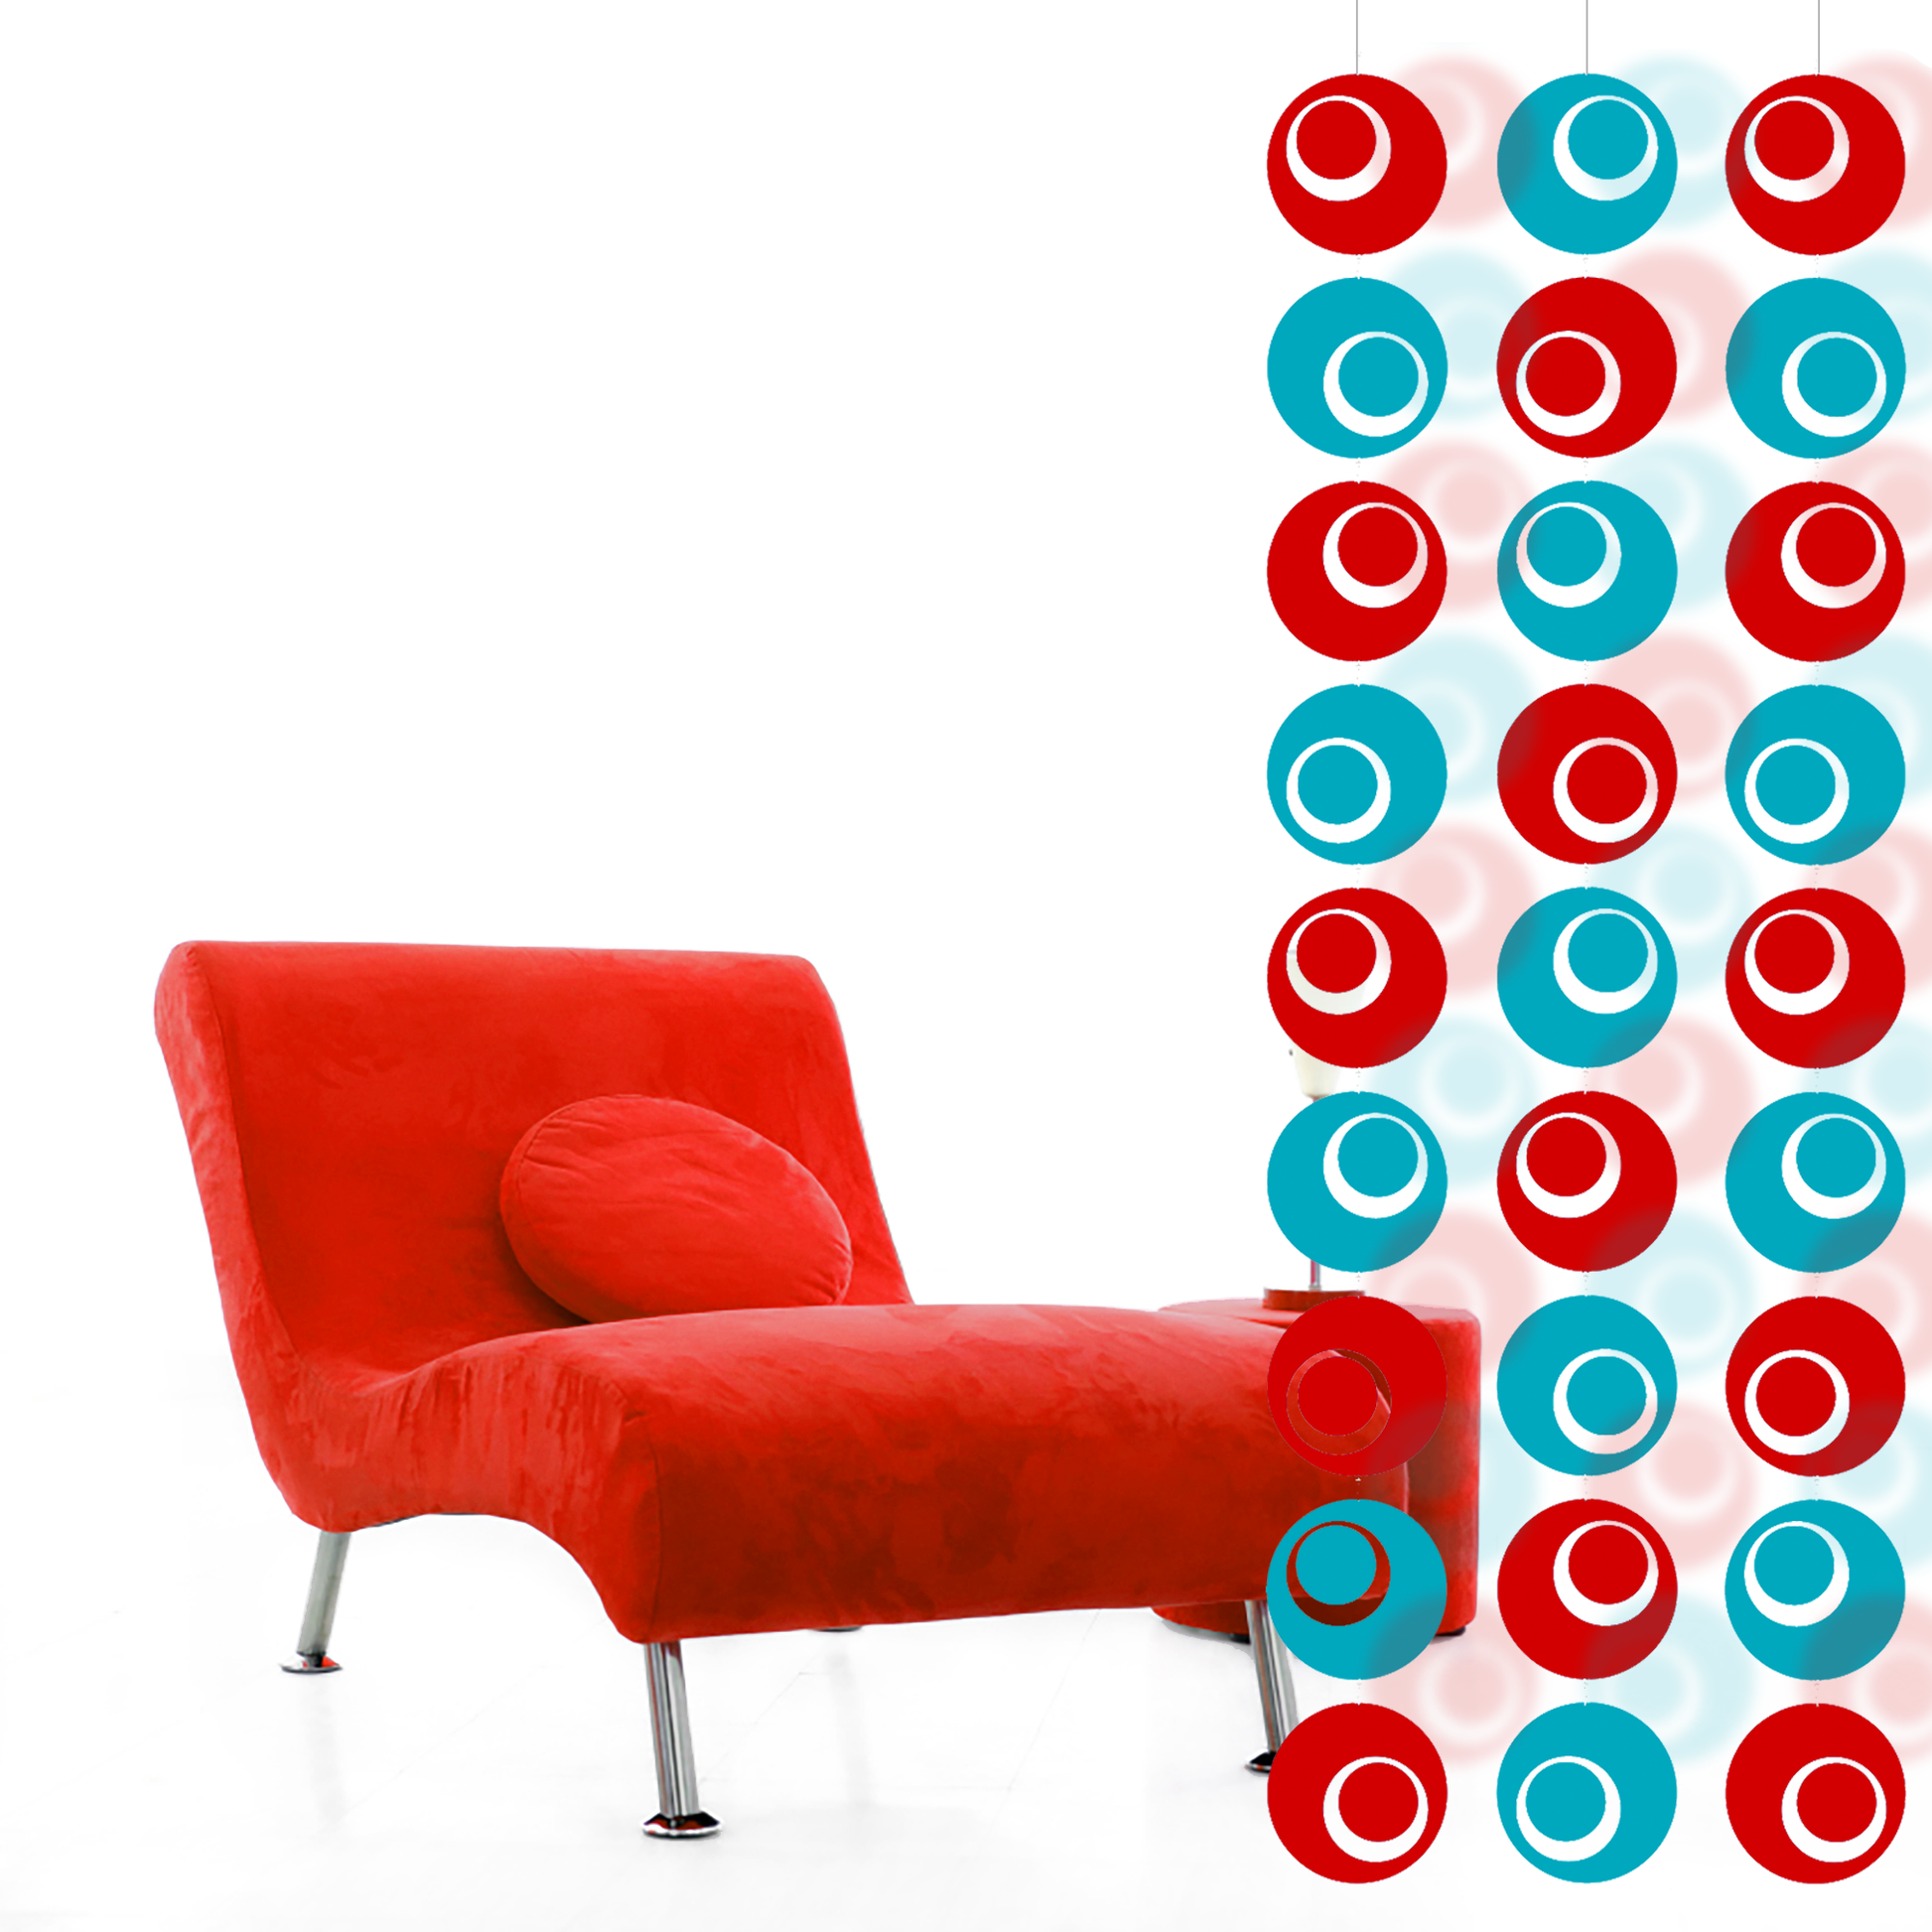 Mod red velvet chair with GROOVY Room Divider in clear red and teal acrylic plexiglass on white background by AtomicMobiles.com